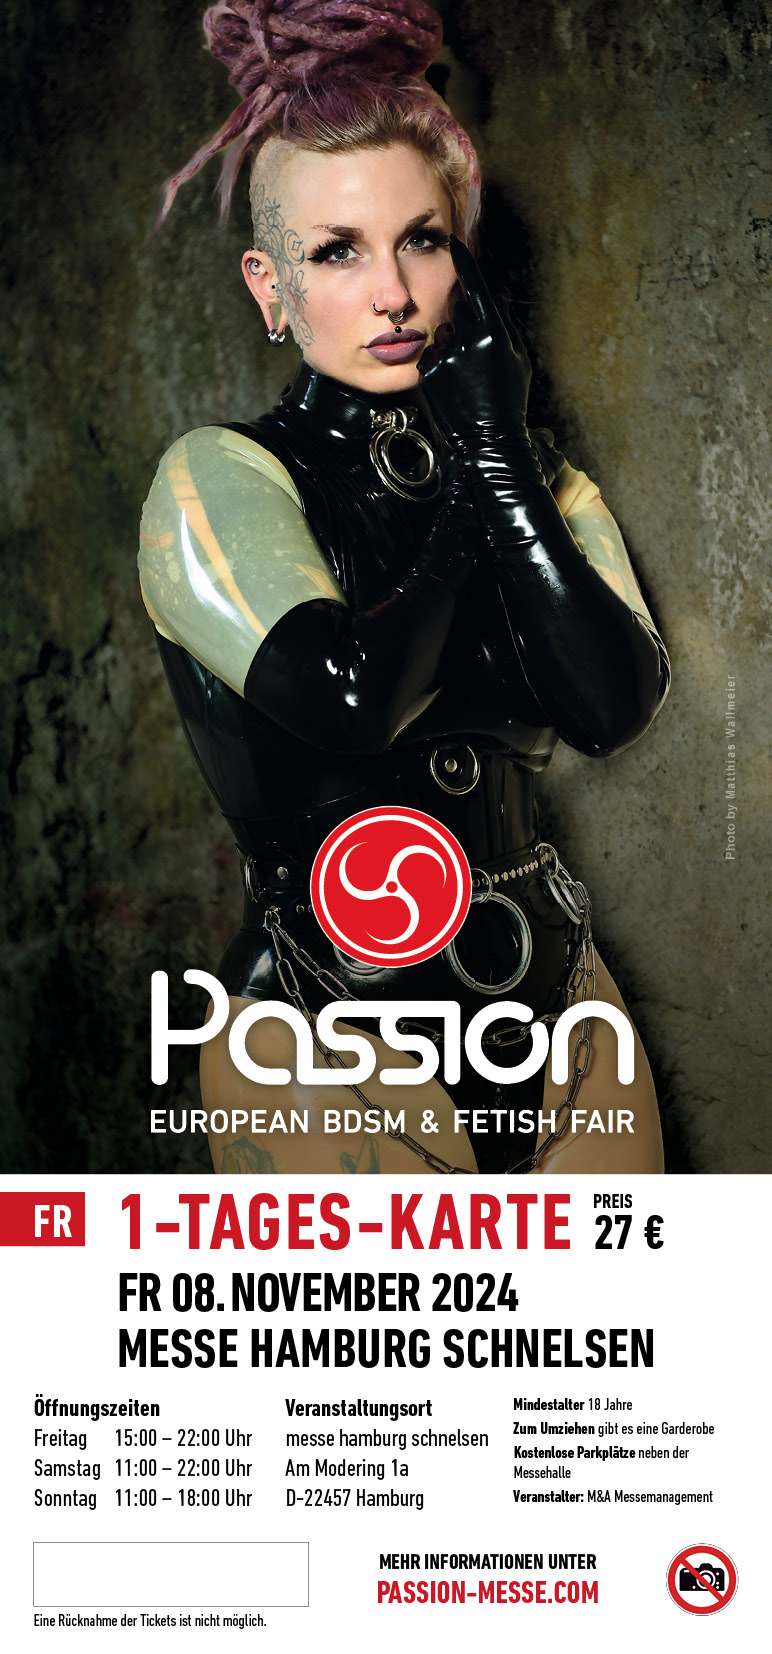 Passion Messe - 1-Tages-Messeticket Freitag